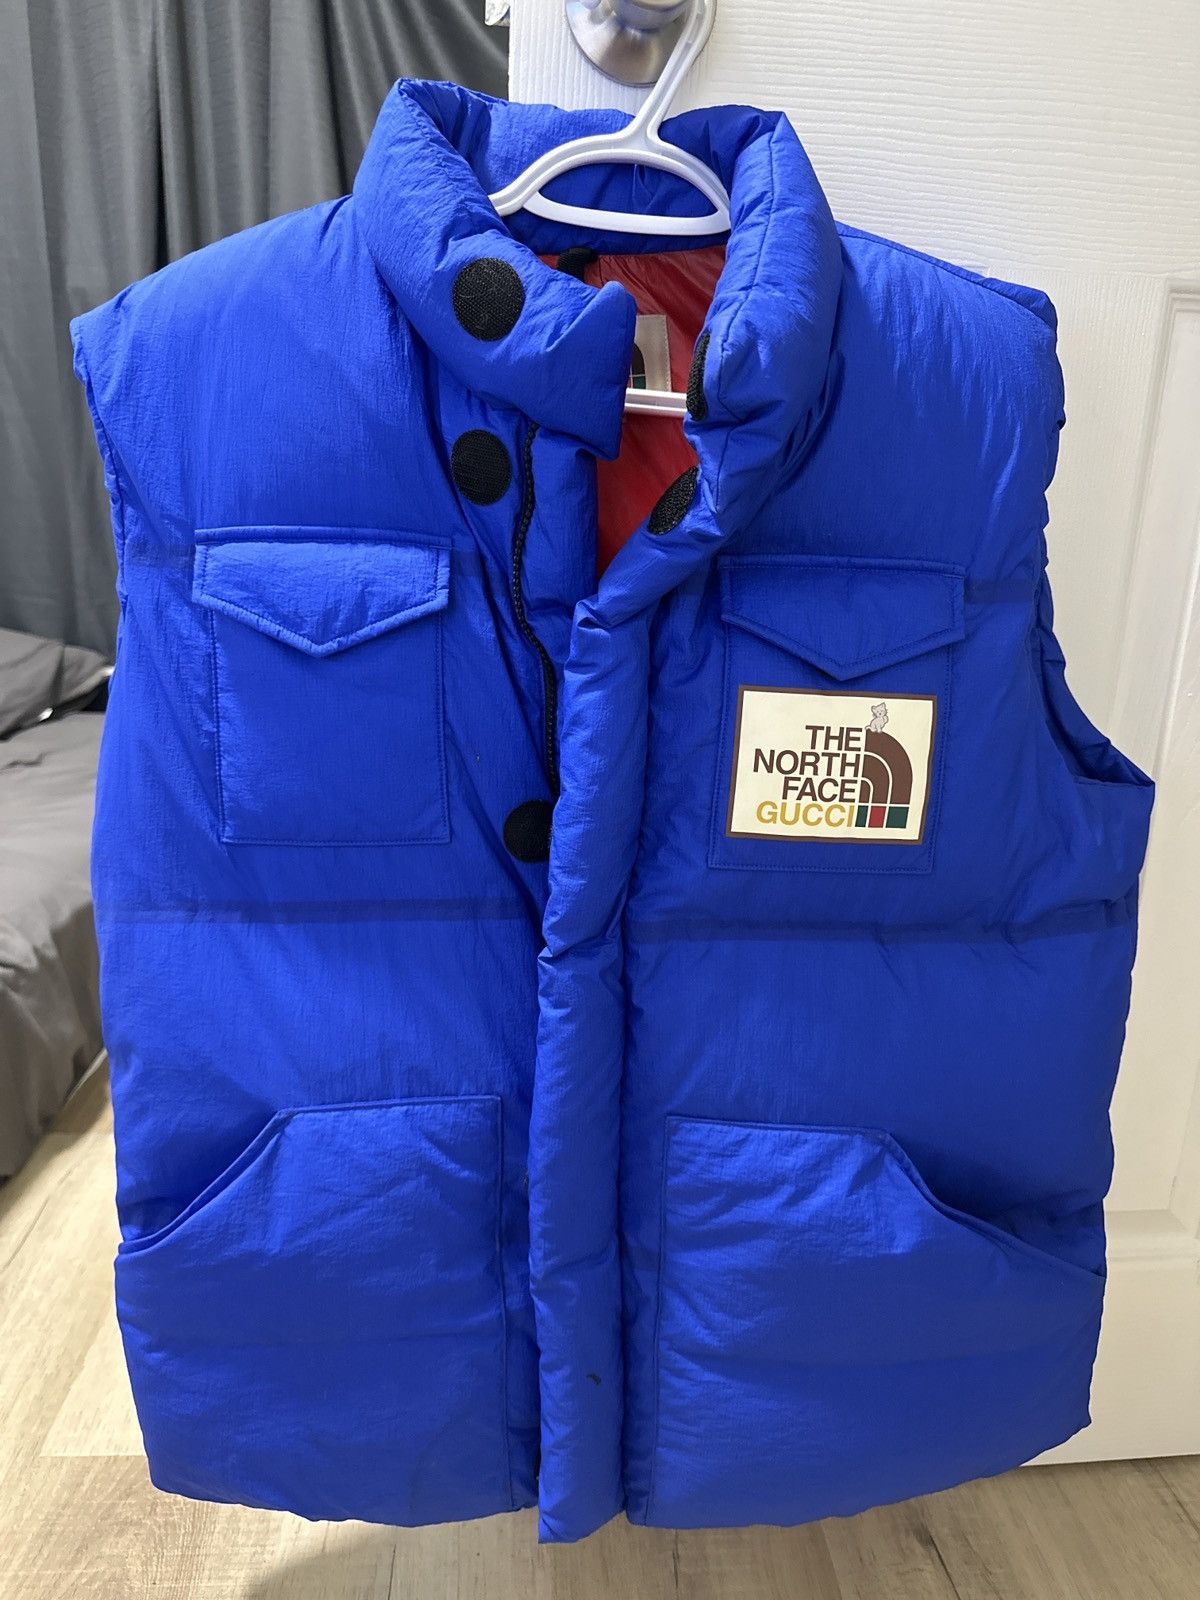 The North Face x Gucci Down Vest Navy (Size Medium) - Gently Used With Tags